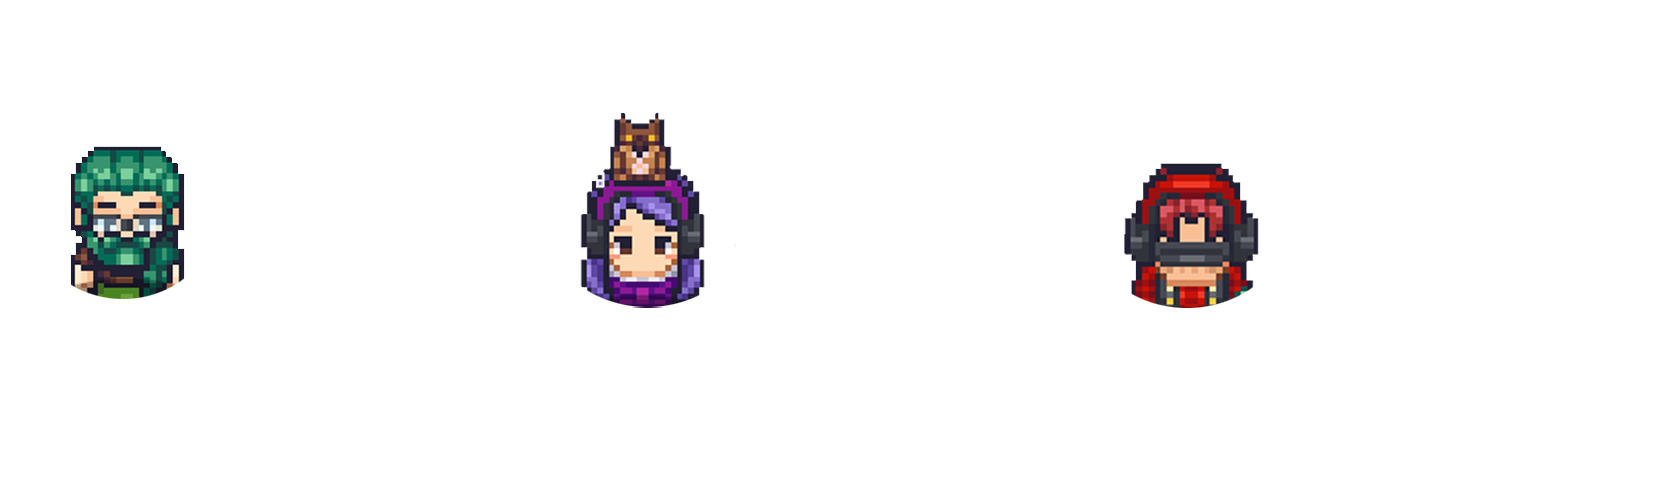 founders2